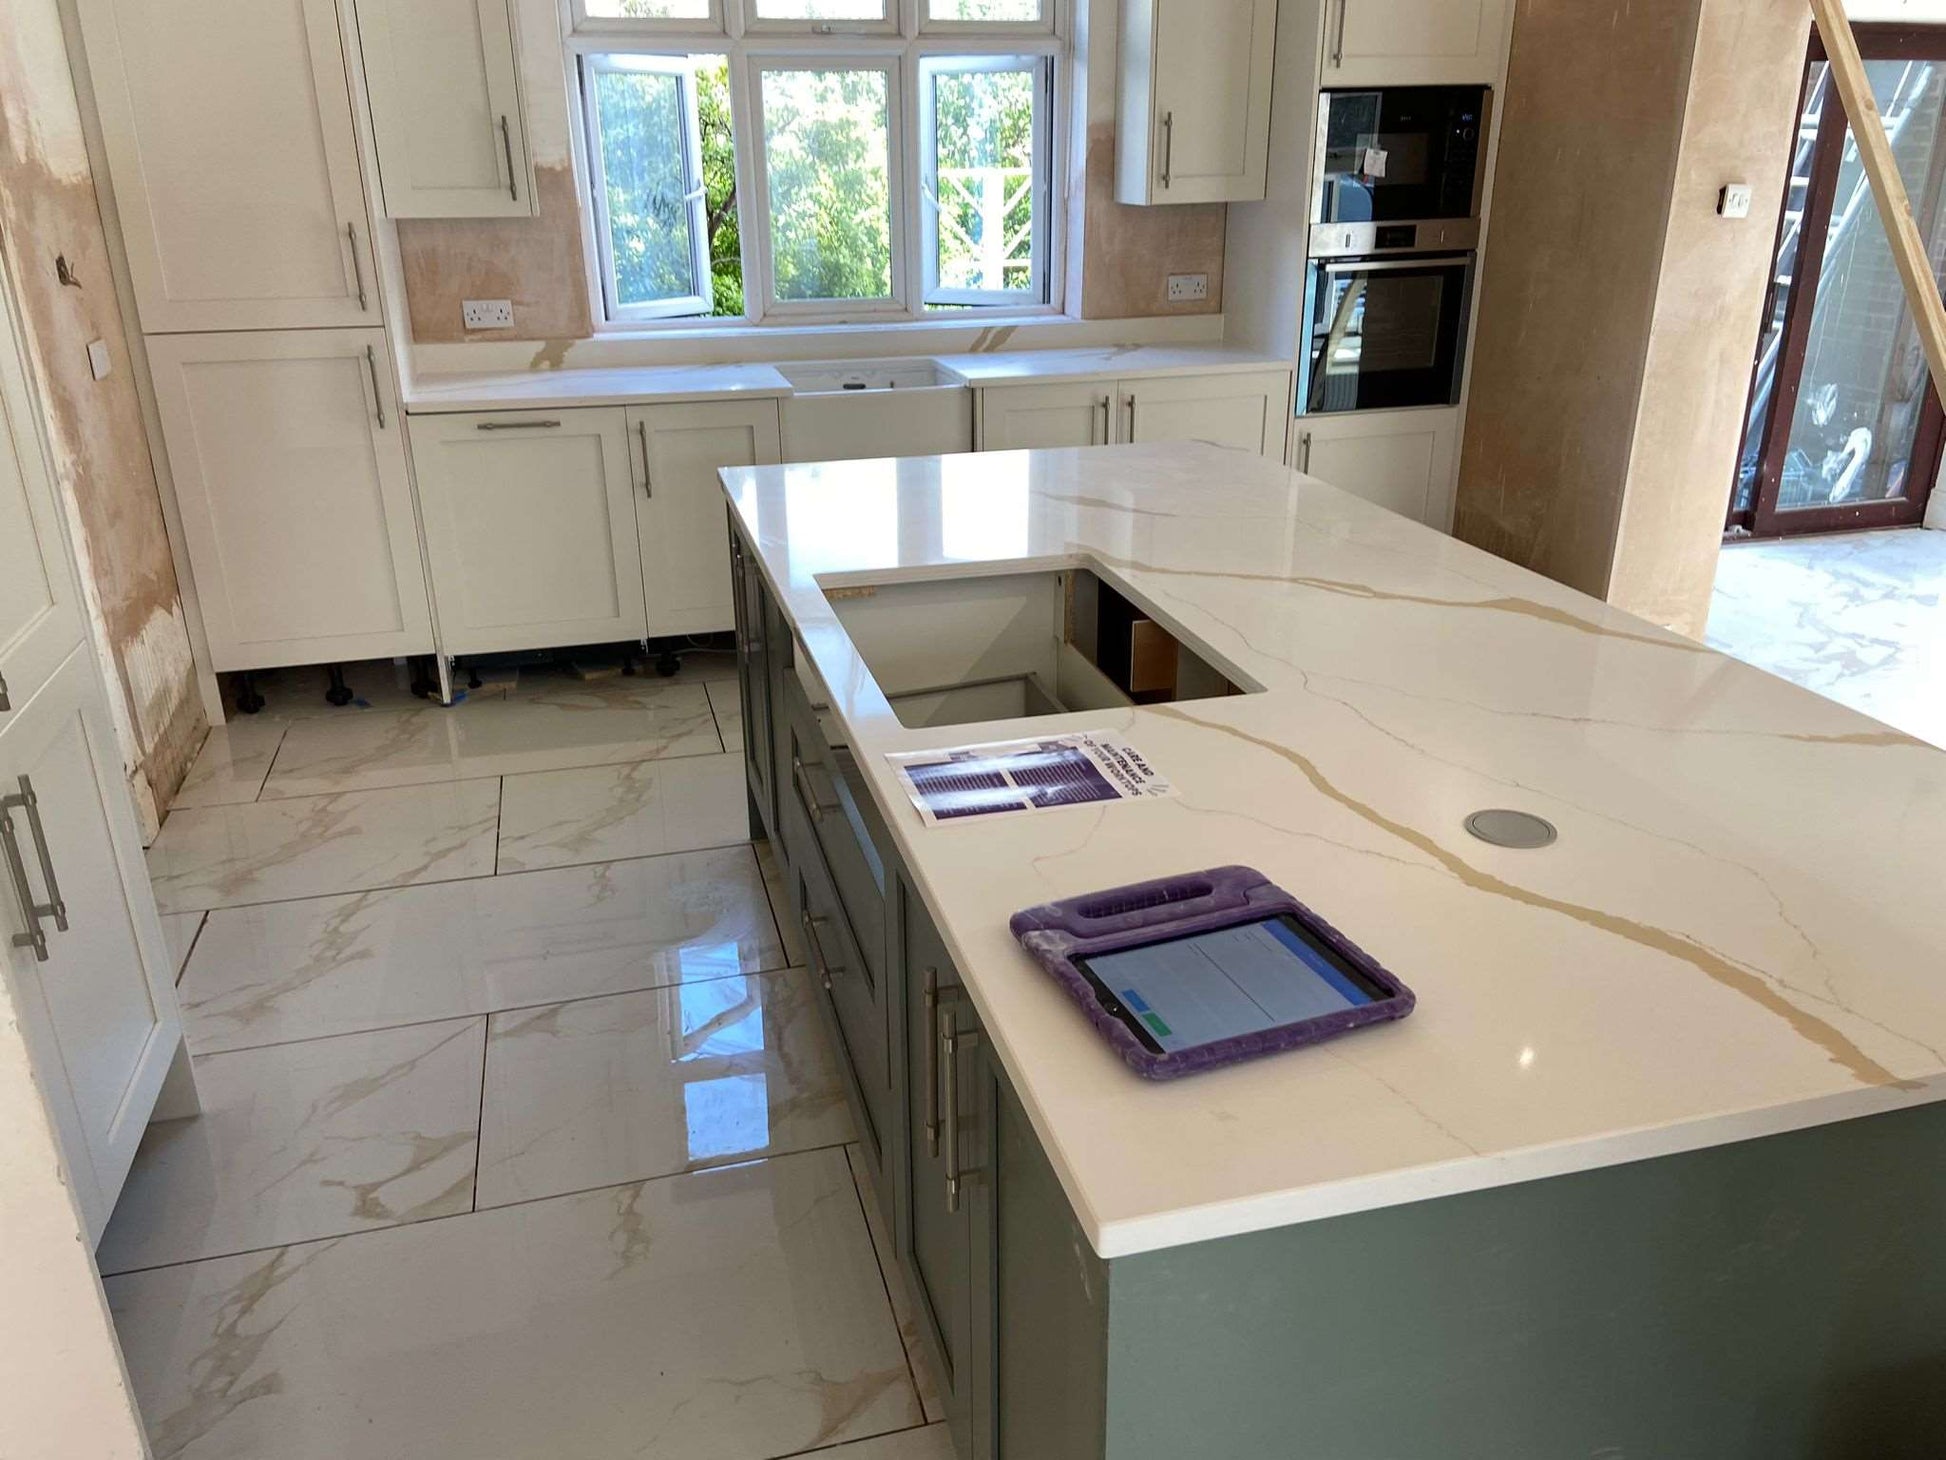 Calacatta Aurous quartz kitchen worktops with a cool white base with vivid gold and subtle grey veining intermixed elegantly.